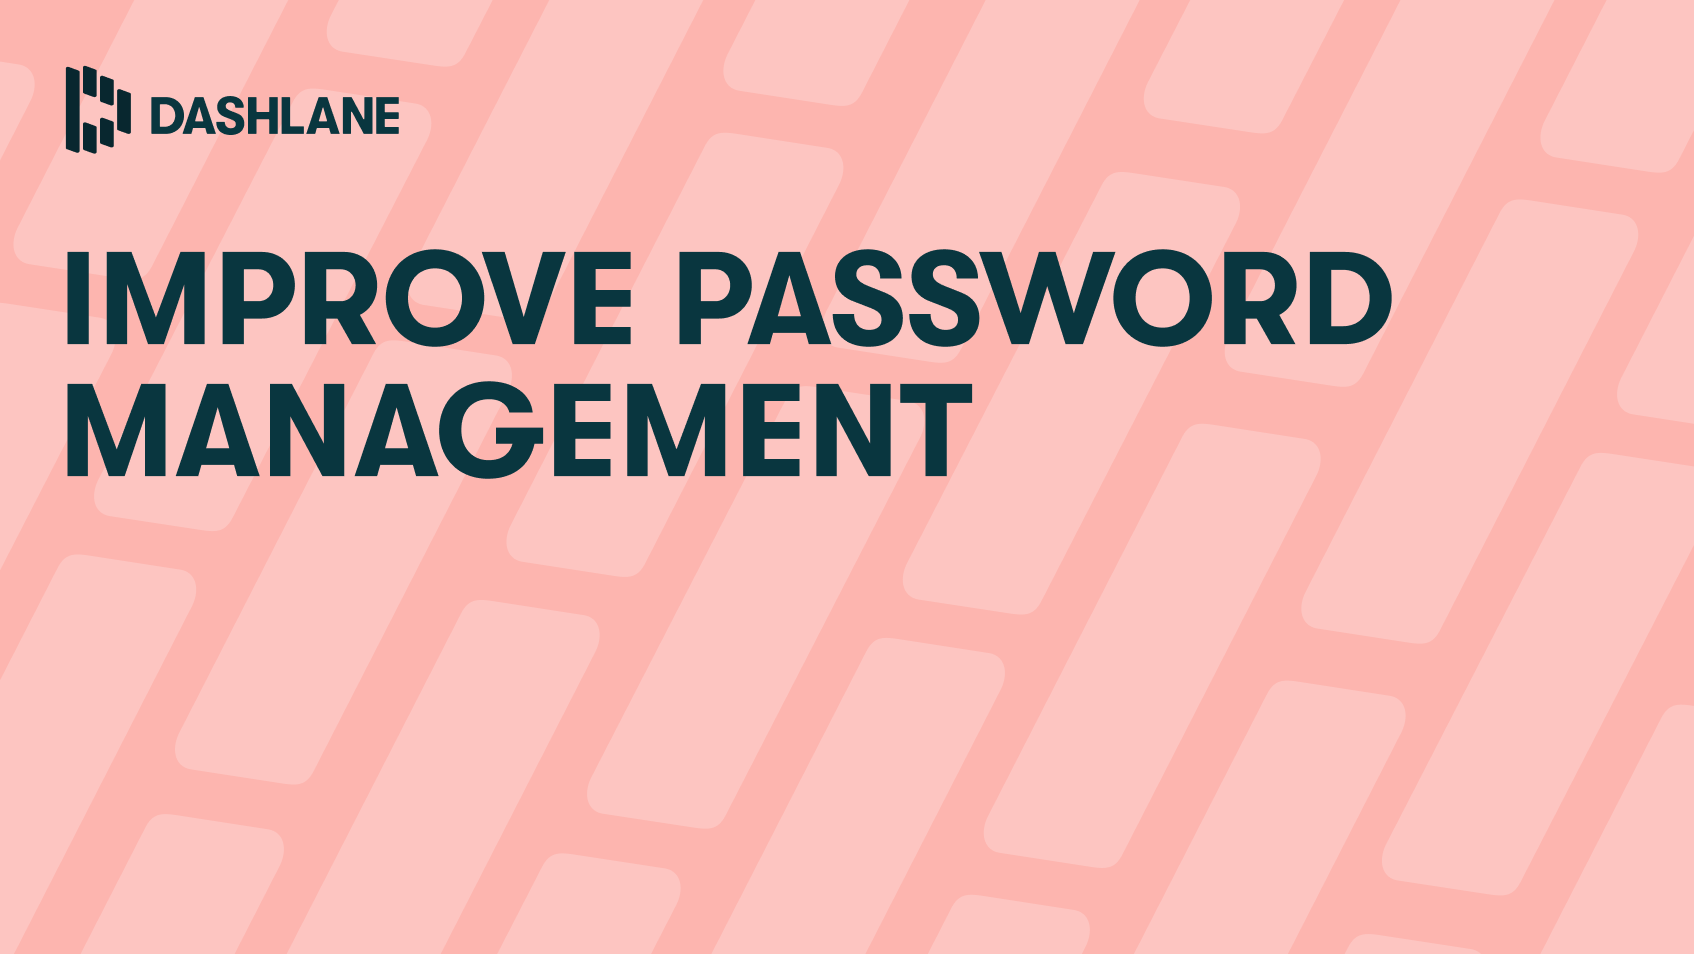 Why Improving Password Management Matters